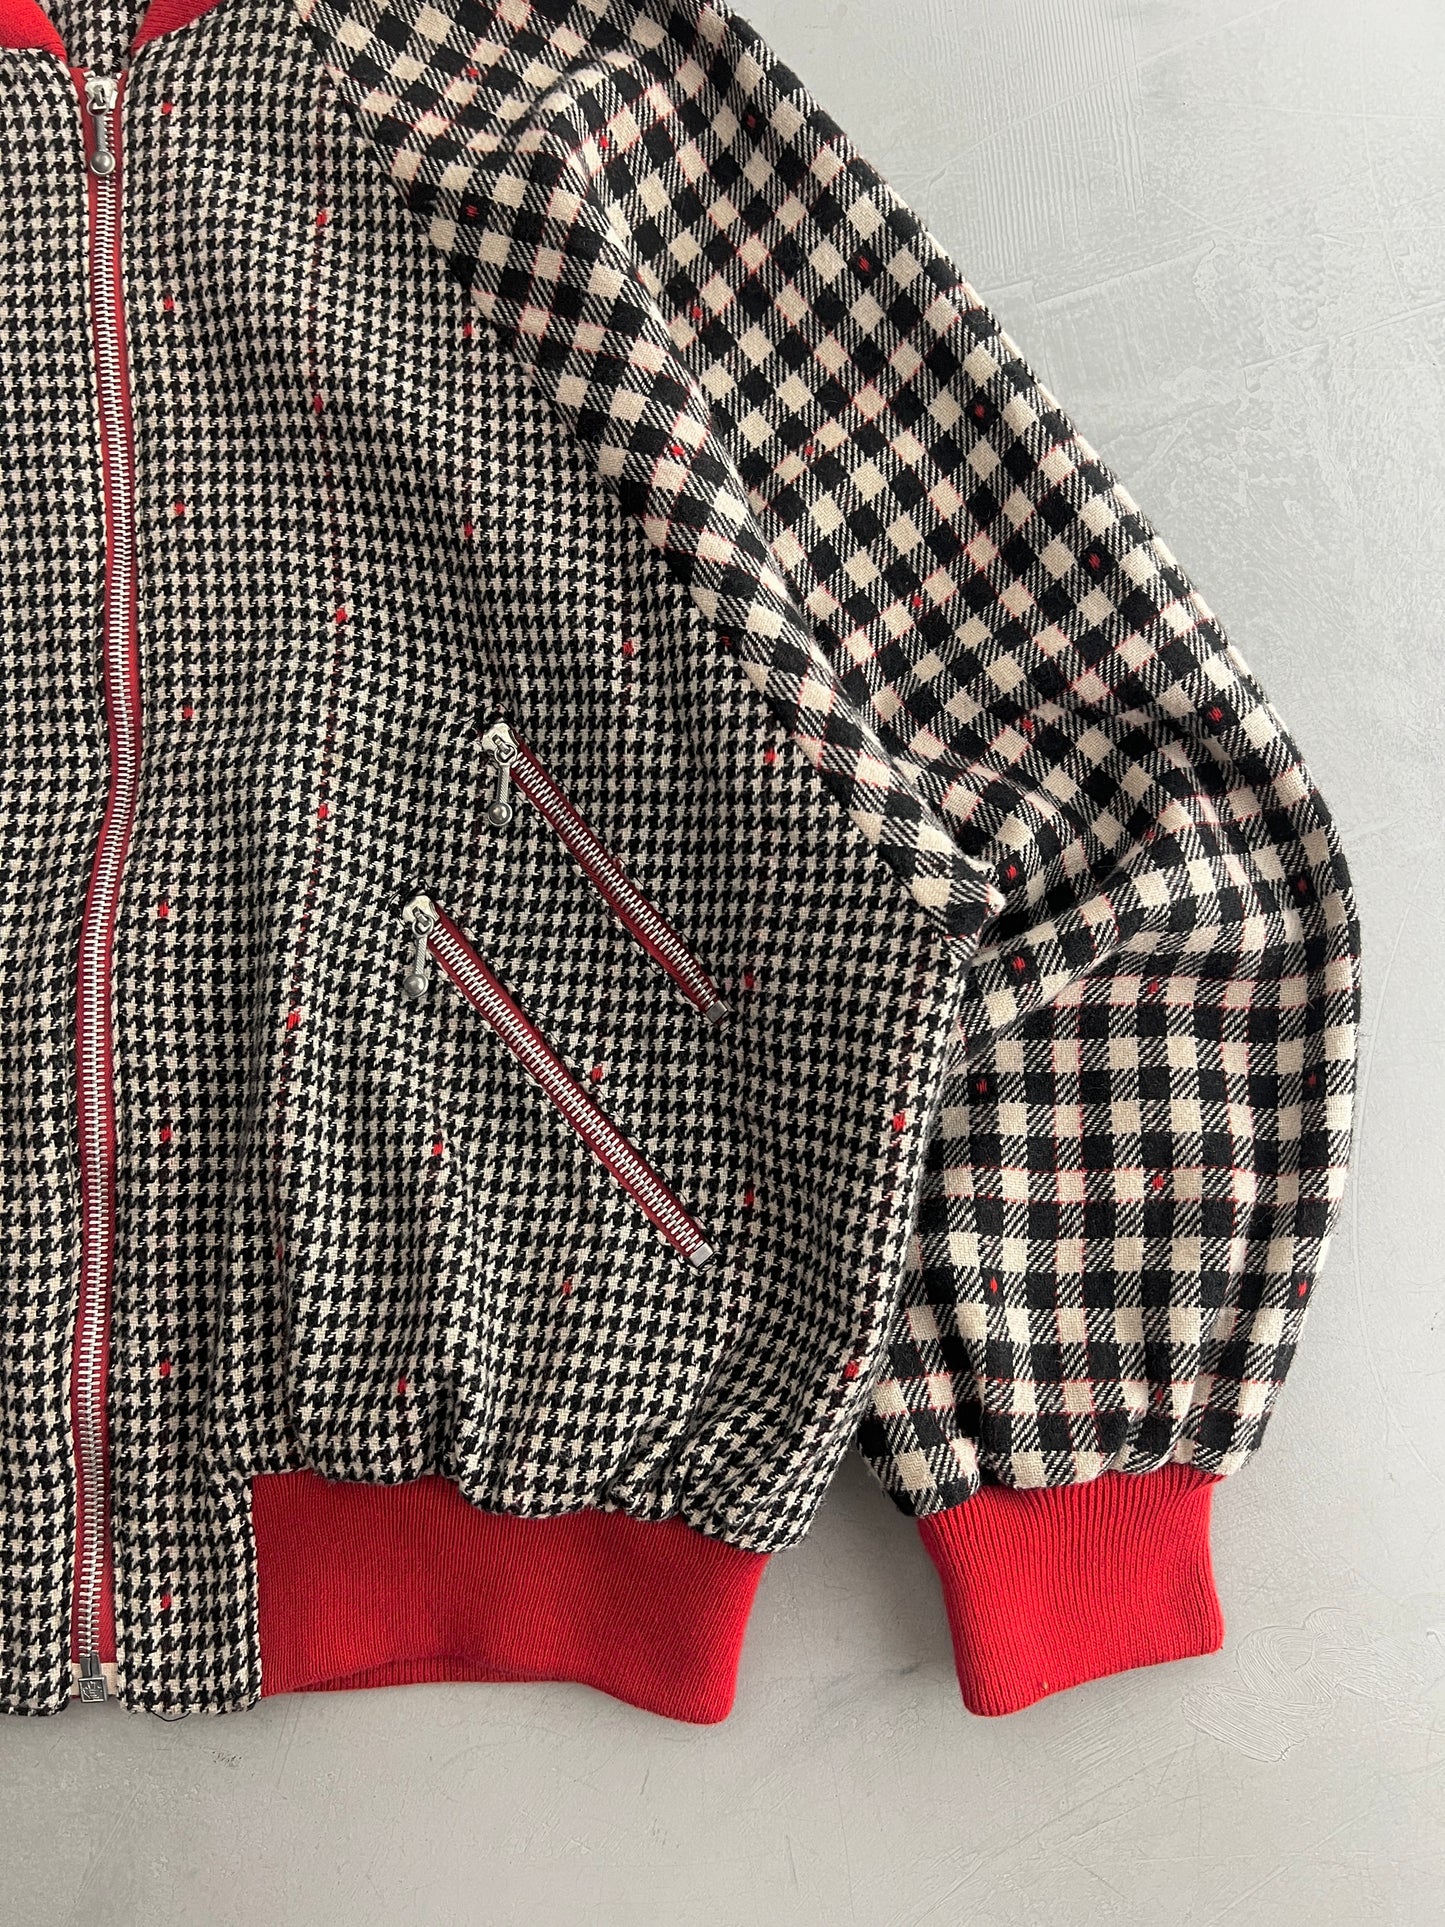 50's/60's Houndstooth Wool Jacket [M]